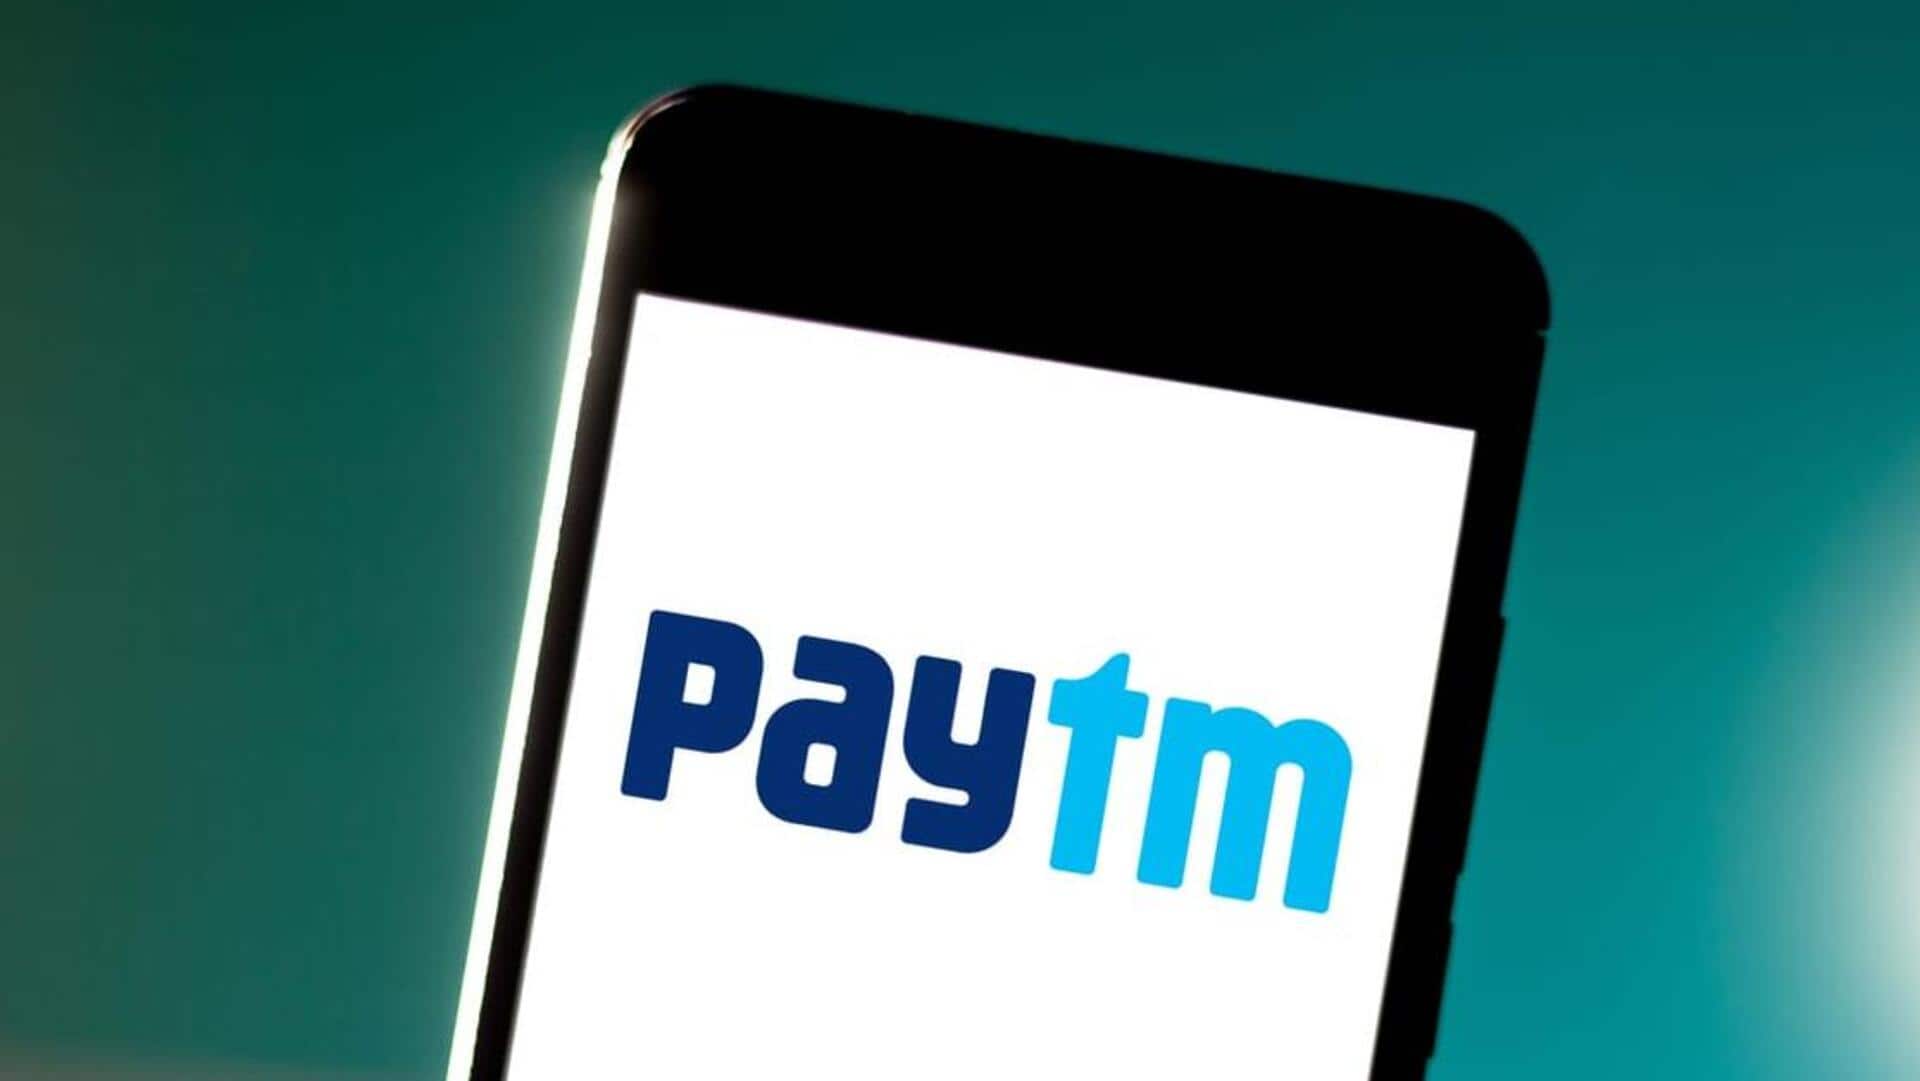 Paytm shares up 5% again: What's fueling the rally